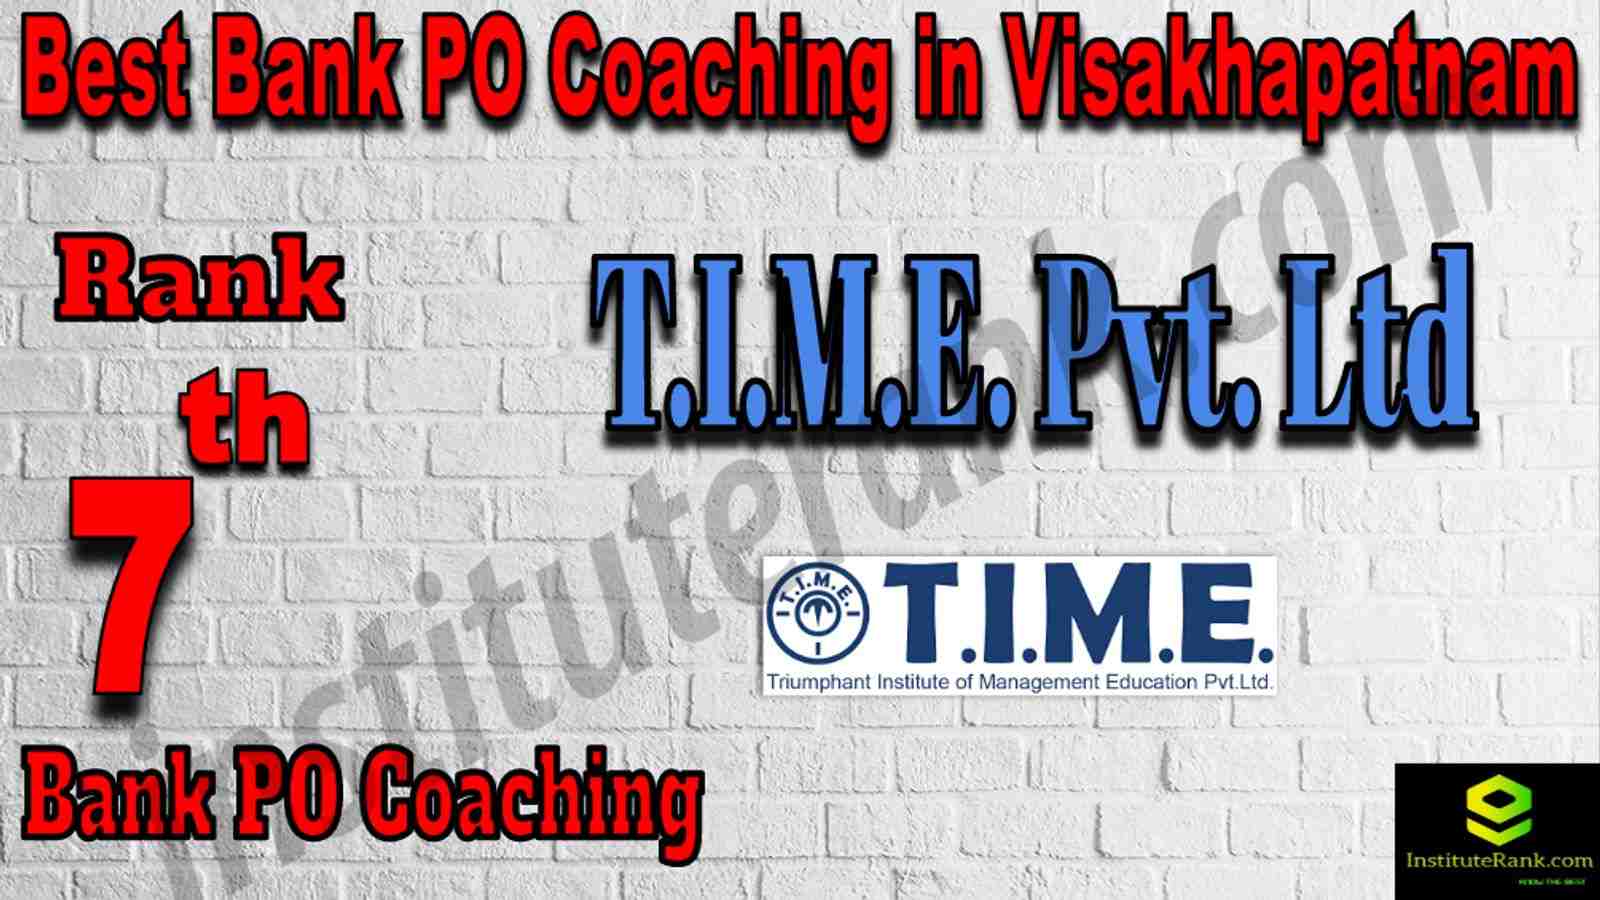 7th Best Bank PO Coaching in Visakhapatnam